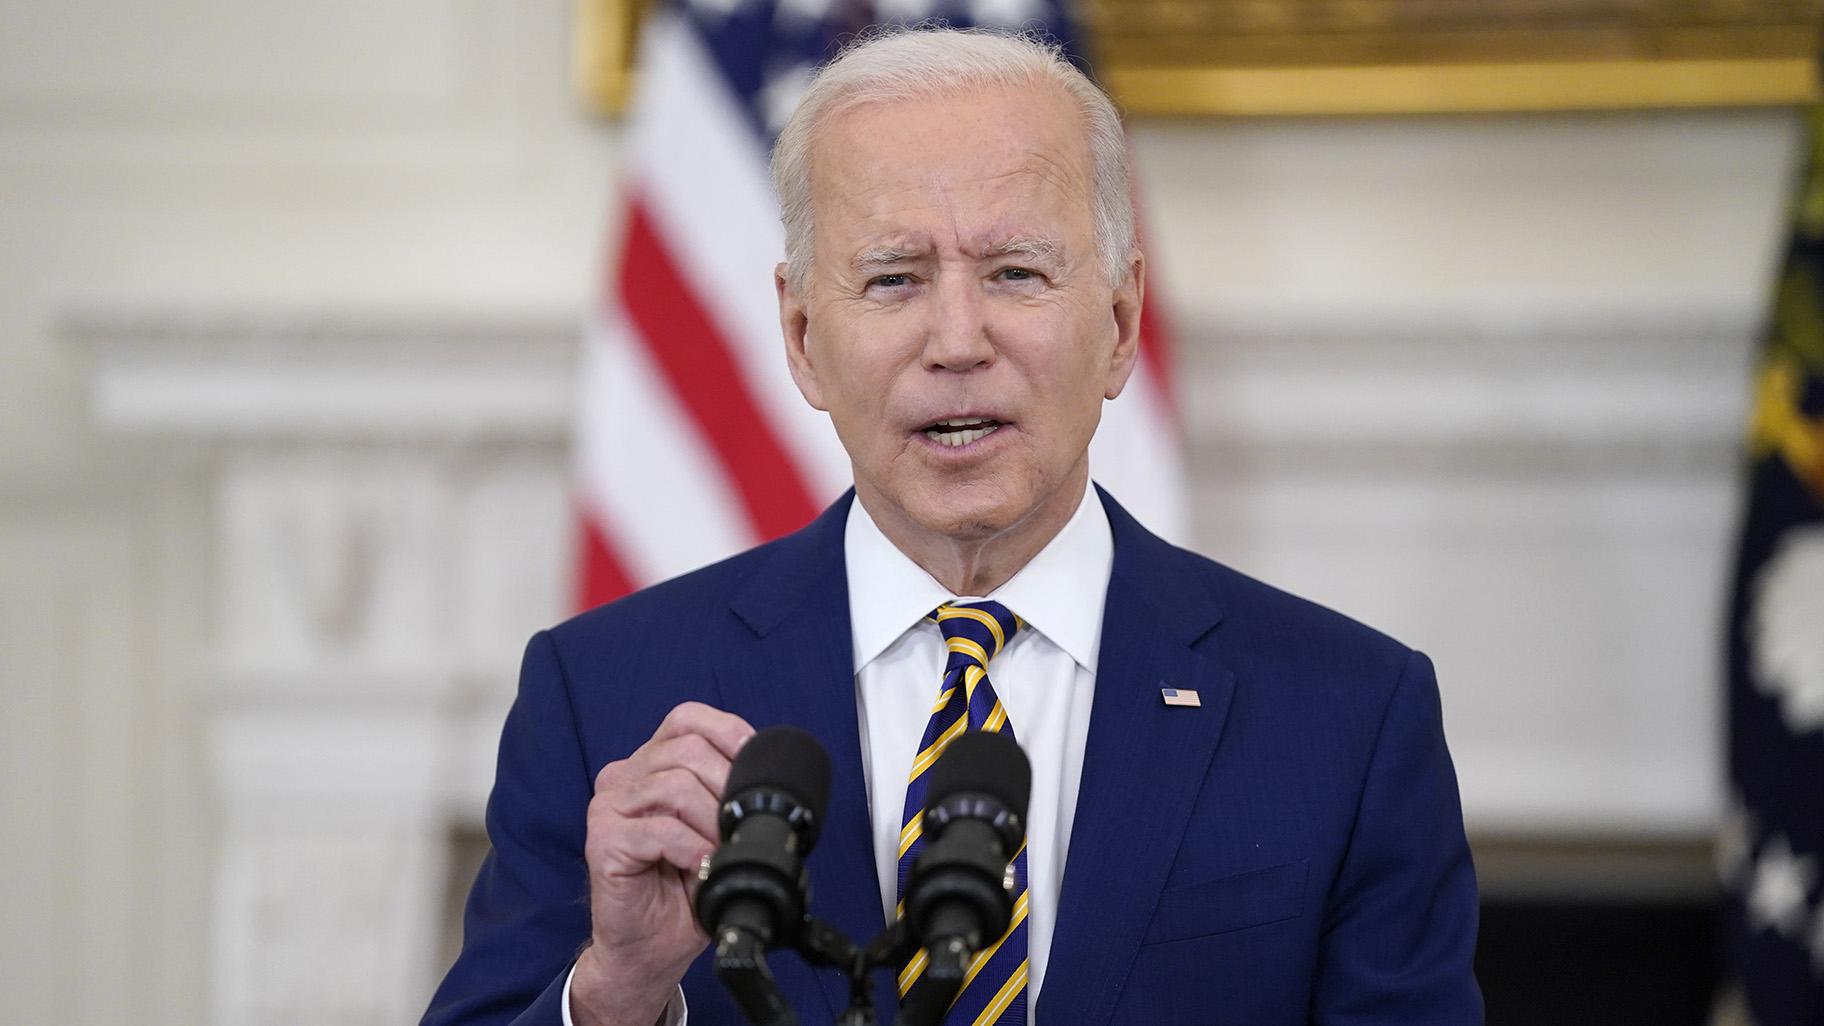 FILE - In this June 18, 2021, file photo, President Joe Biden speaks in the State Dining Room of the White House in Washington. (AP Photo / Evan Vucci, File)